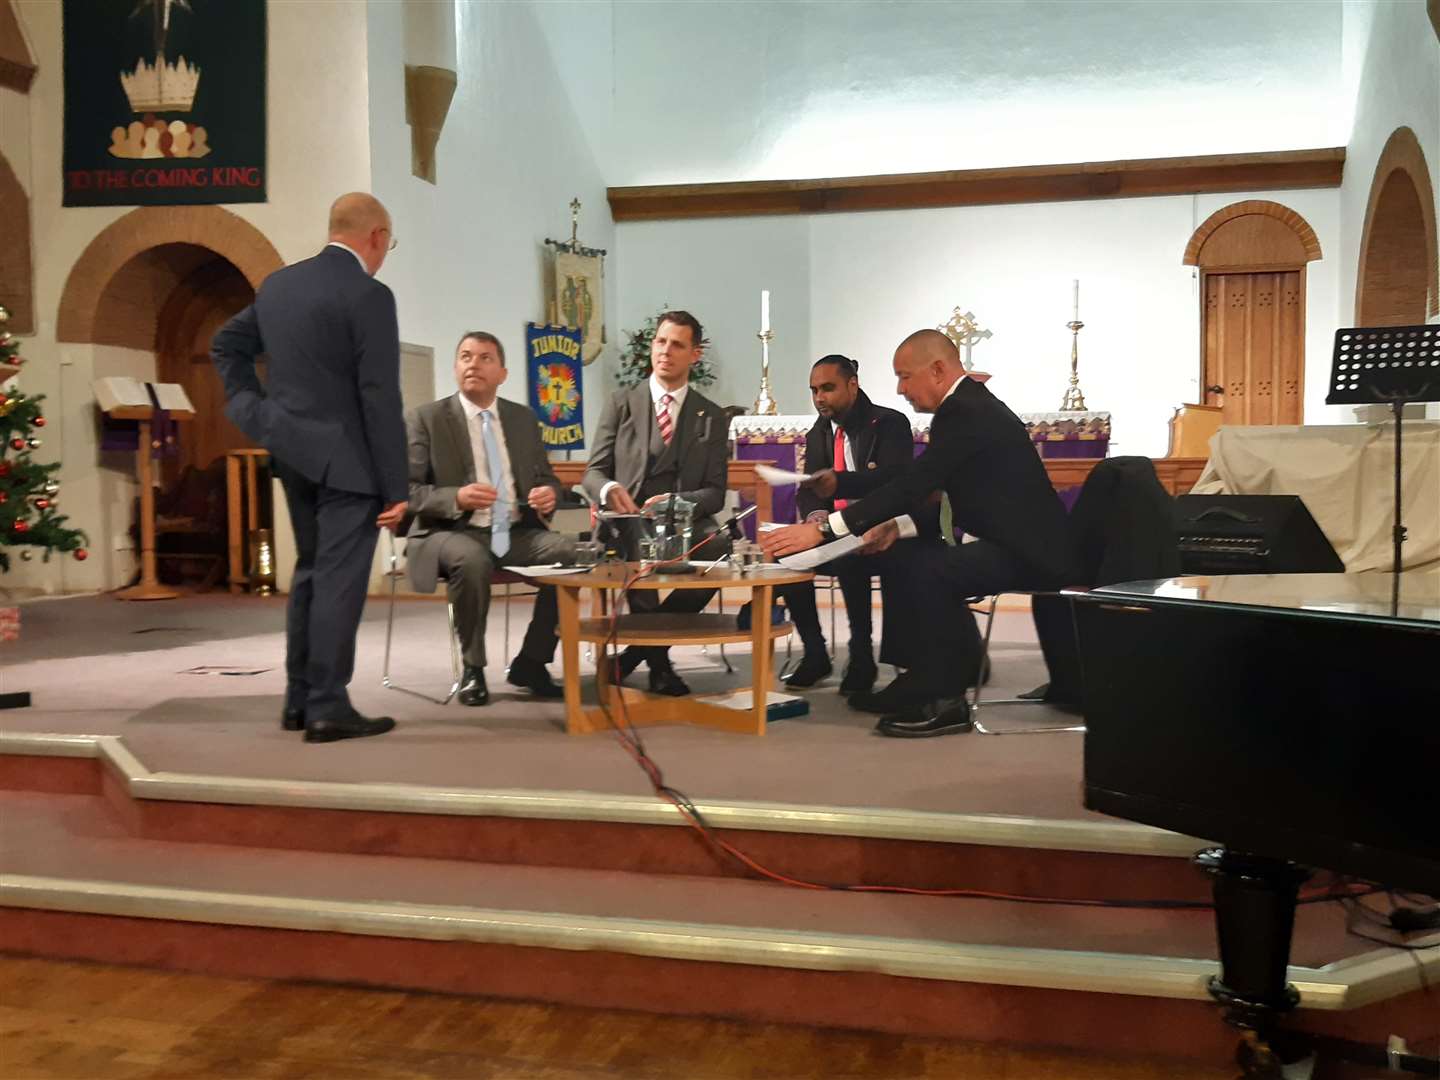 An elections hustings took place in Christ Church in Dartford (22922448)